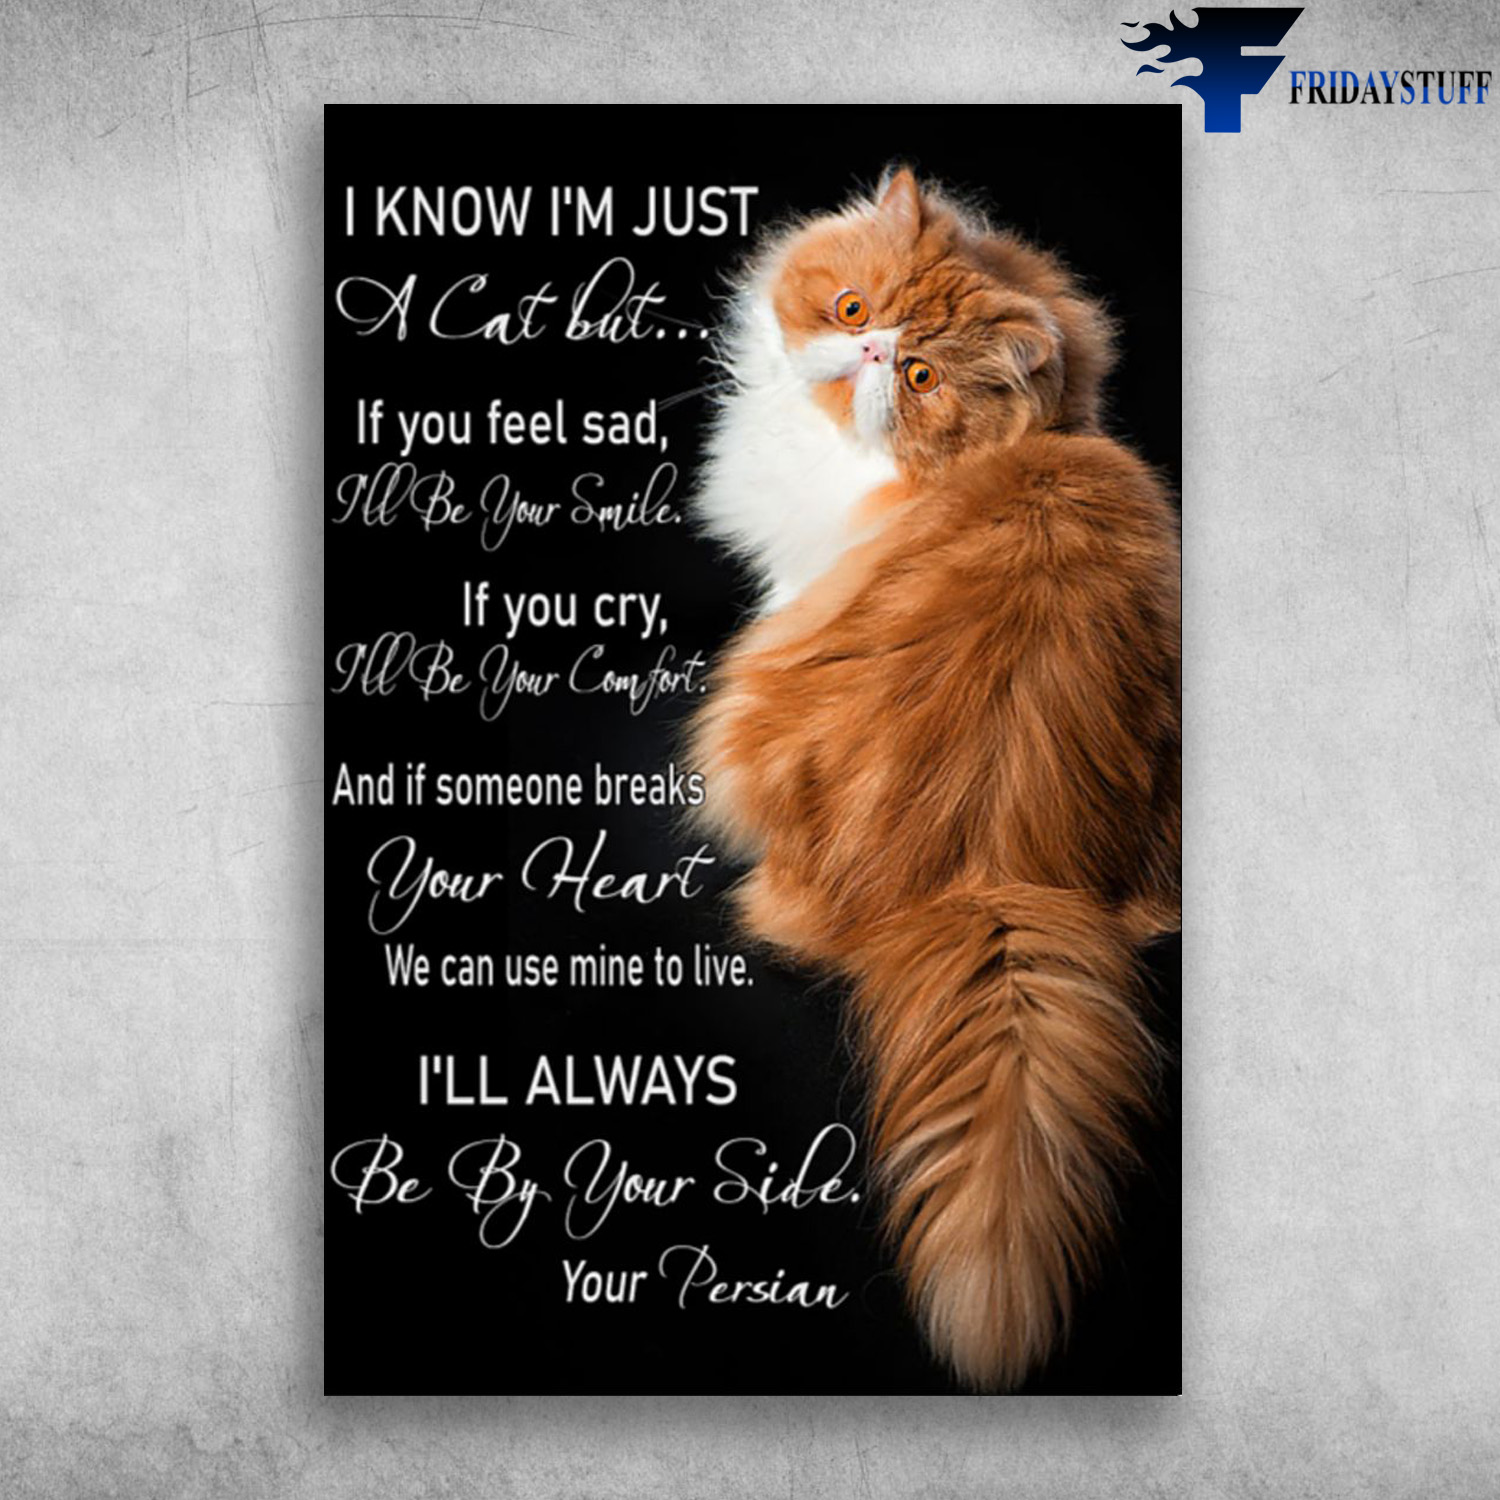 Persian Cat - I Know I'm Just A Cat But, If You Feel Sad, I'll Be Your Smile, If You Cry, I'll Be Your Comfort, And If Someone Breaks Your Heart, We Can Use Mine To Live, I'll Always Be By Your Side, Your Persian